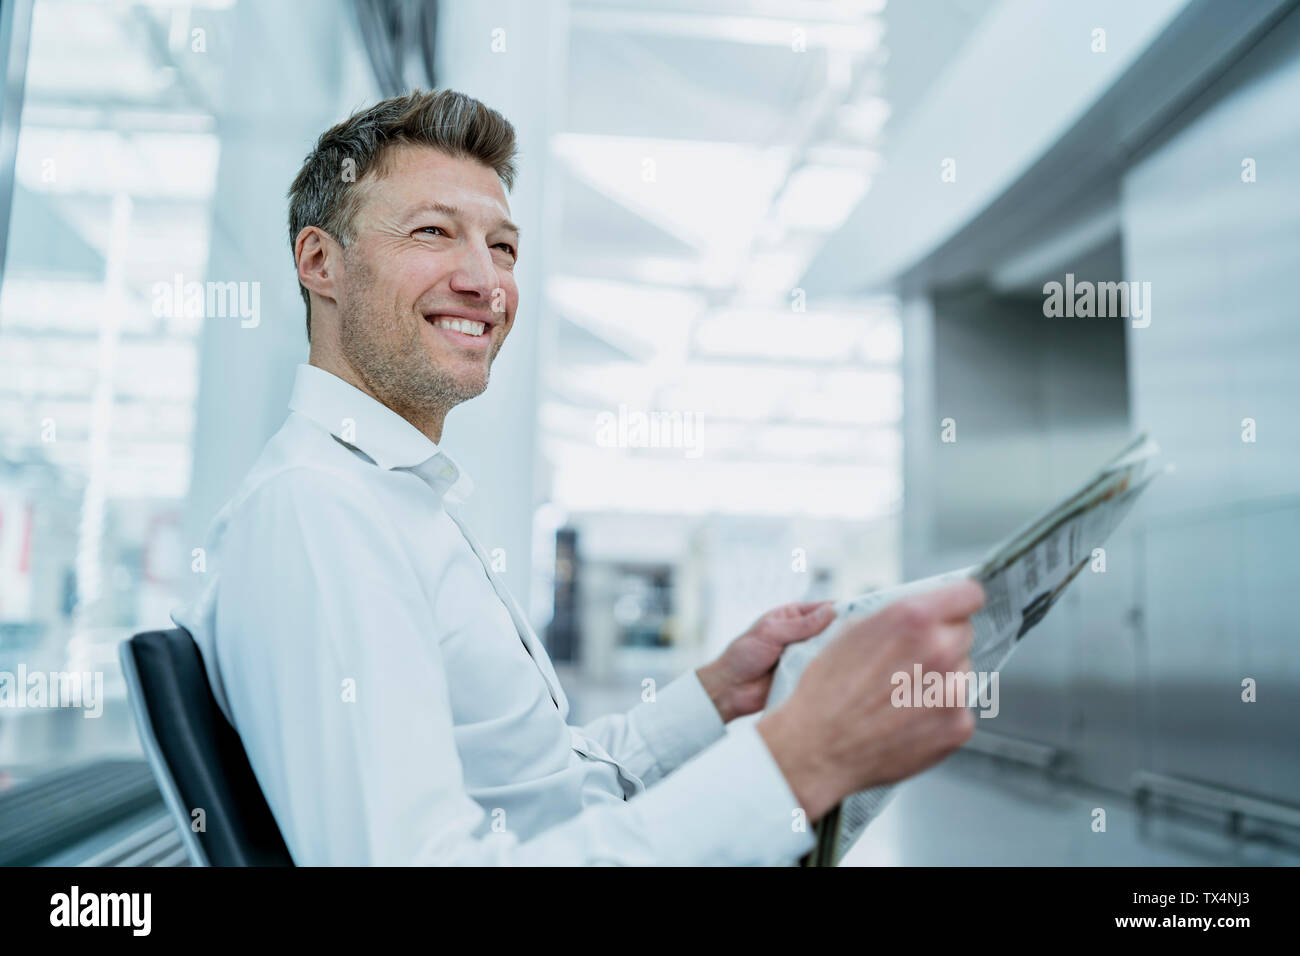 Smiling businessman sitting in waiting area with newspaper Stock Photo